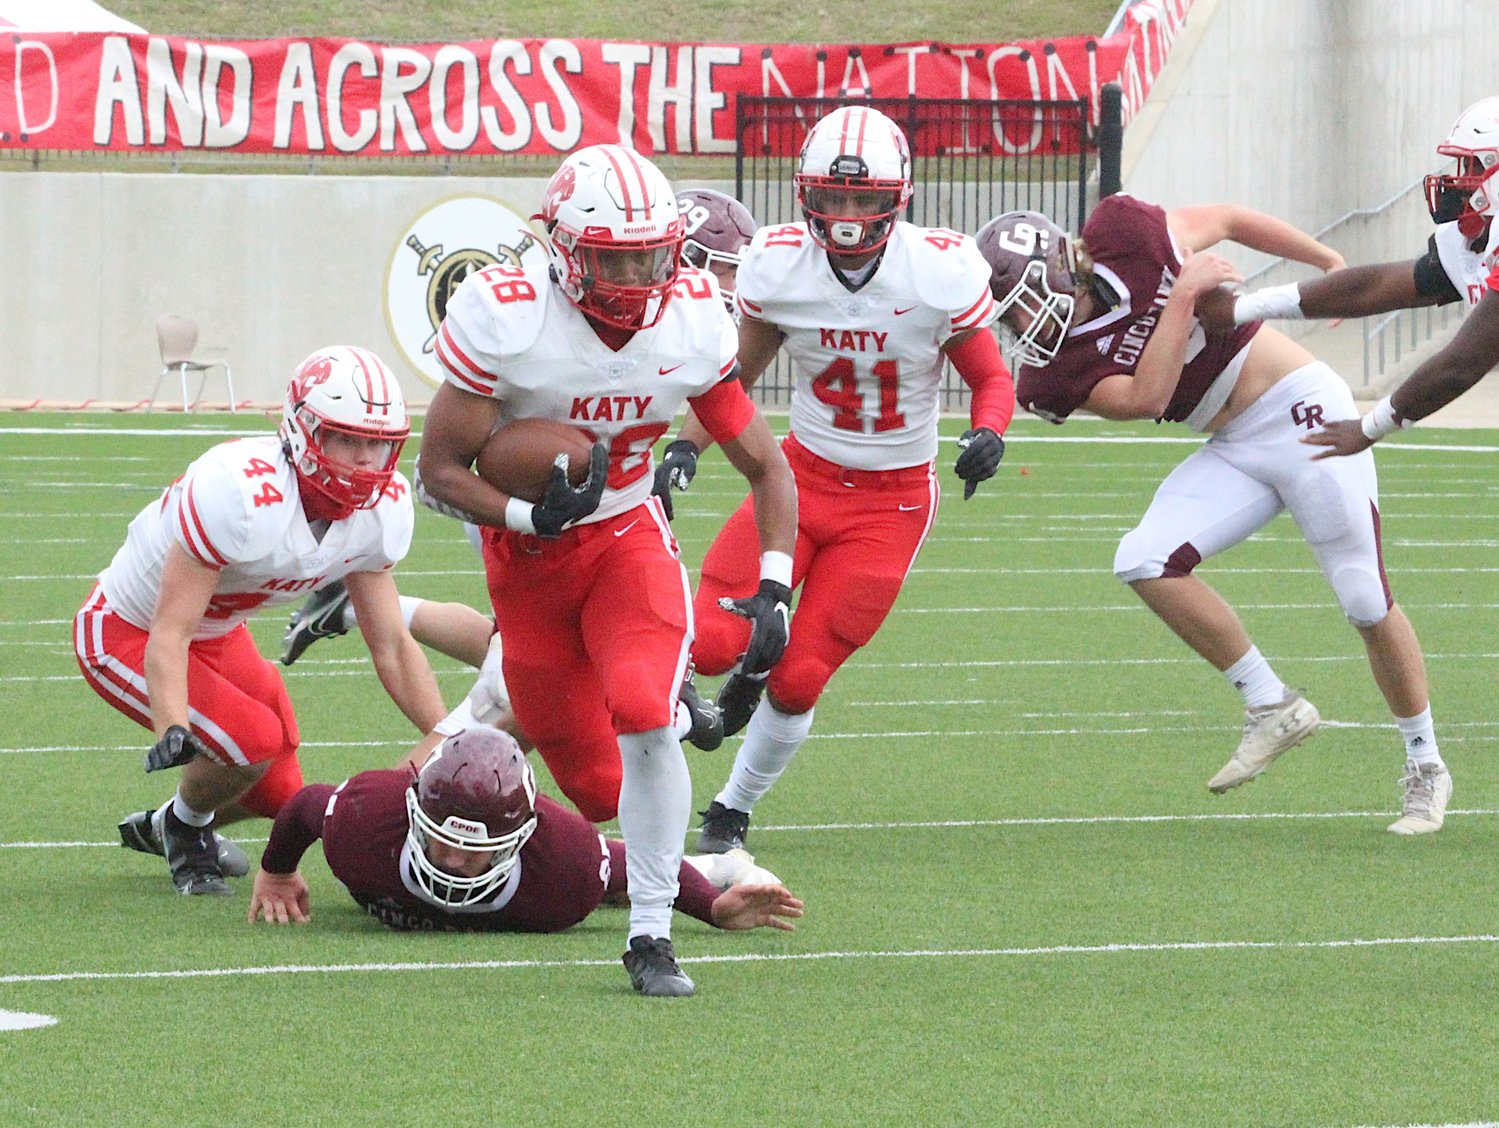 Senior running back Jalen Davis and the Katy Tigers are ranked No. 5 in Class 6A in this week's Houston area high school football media poll.